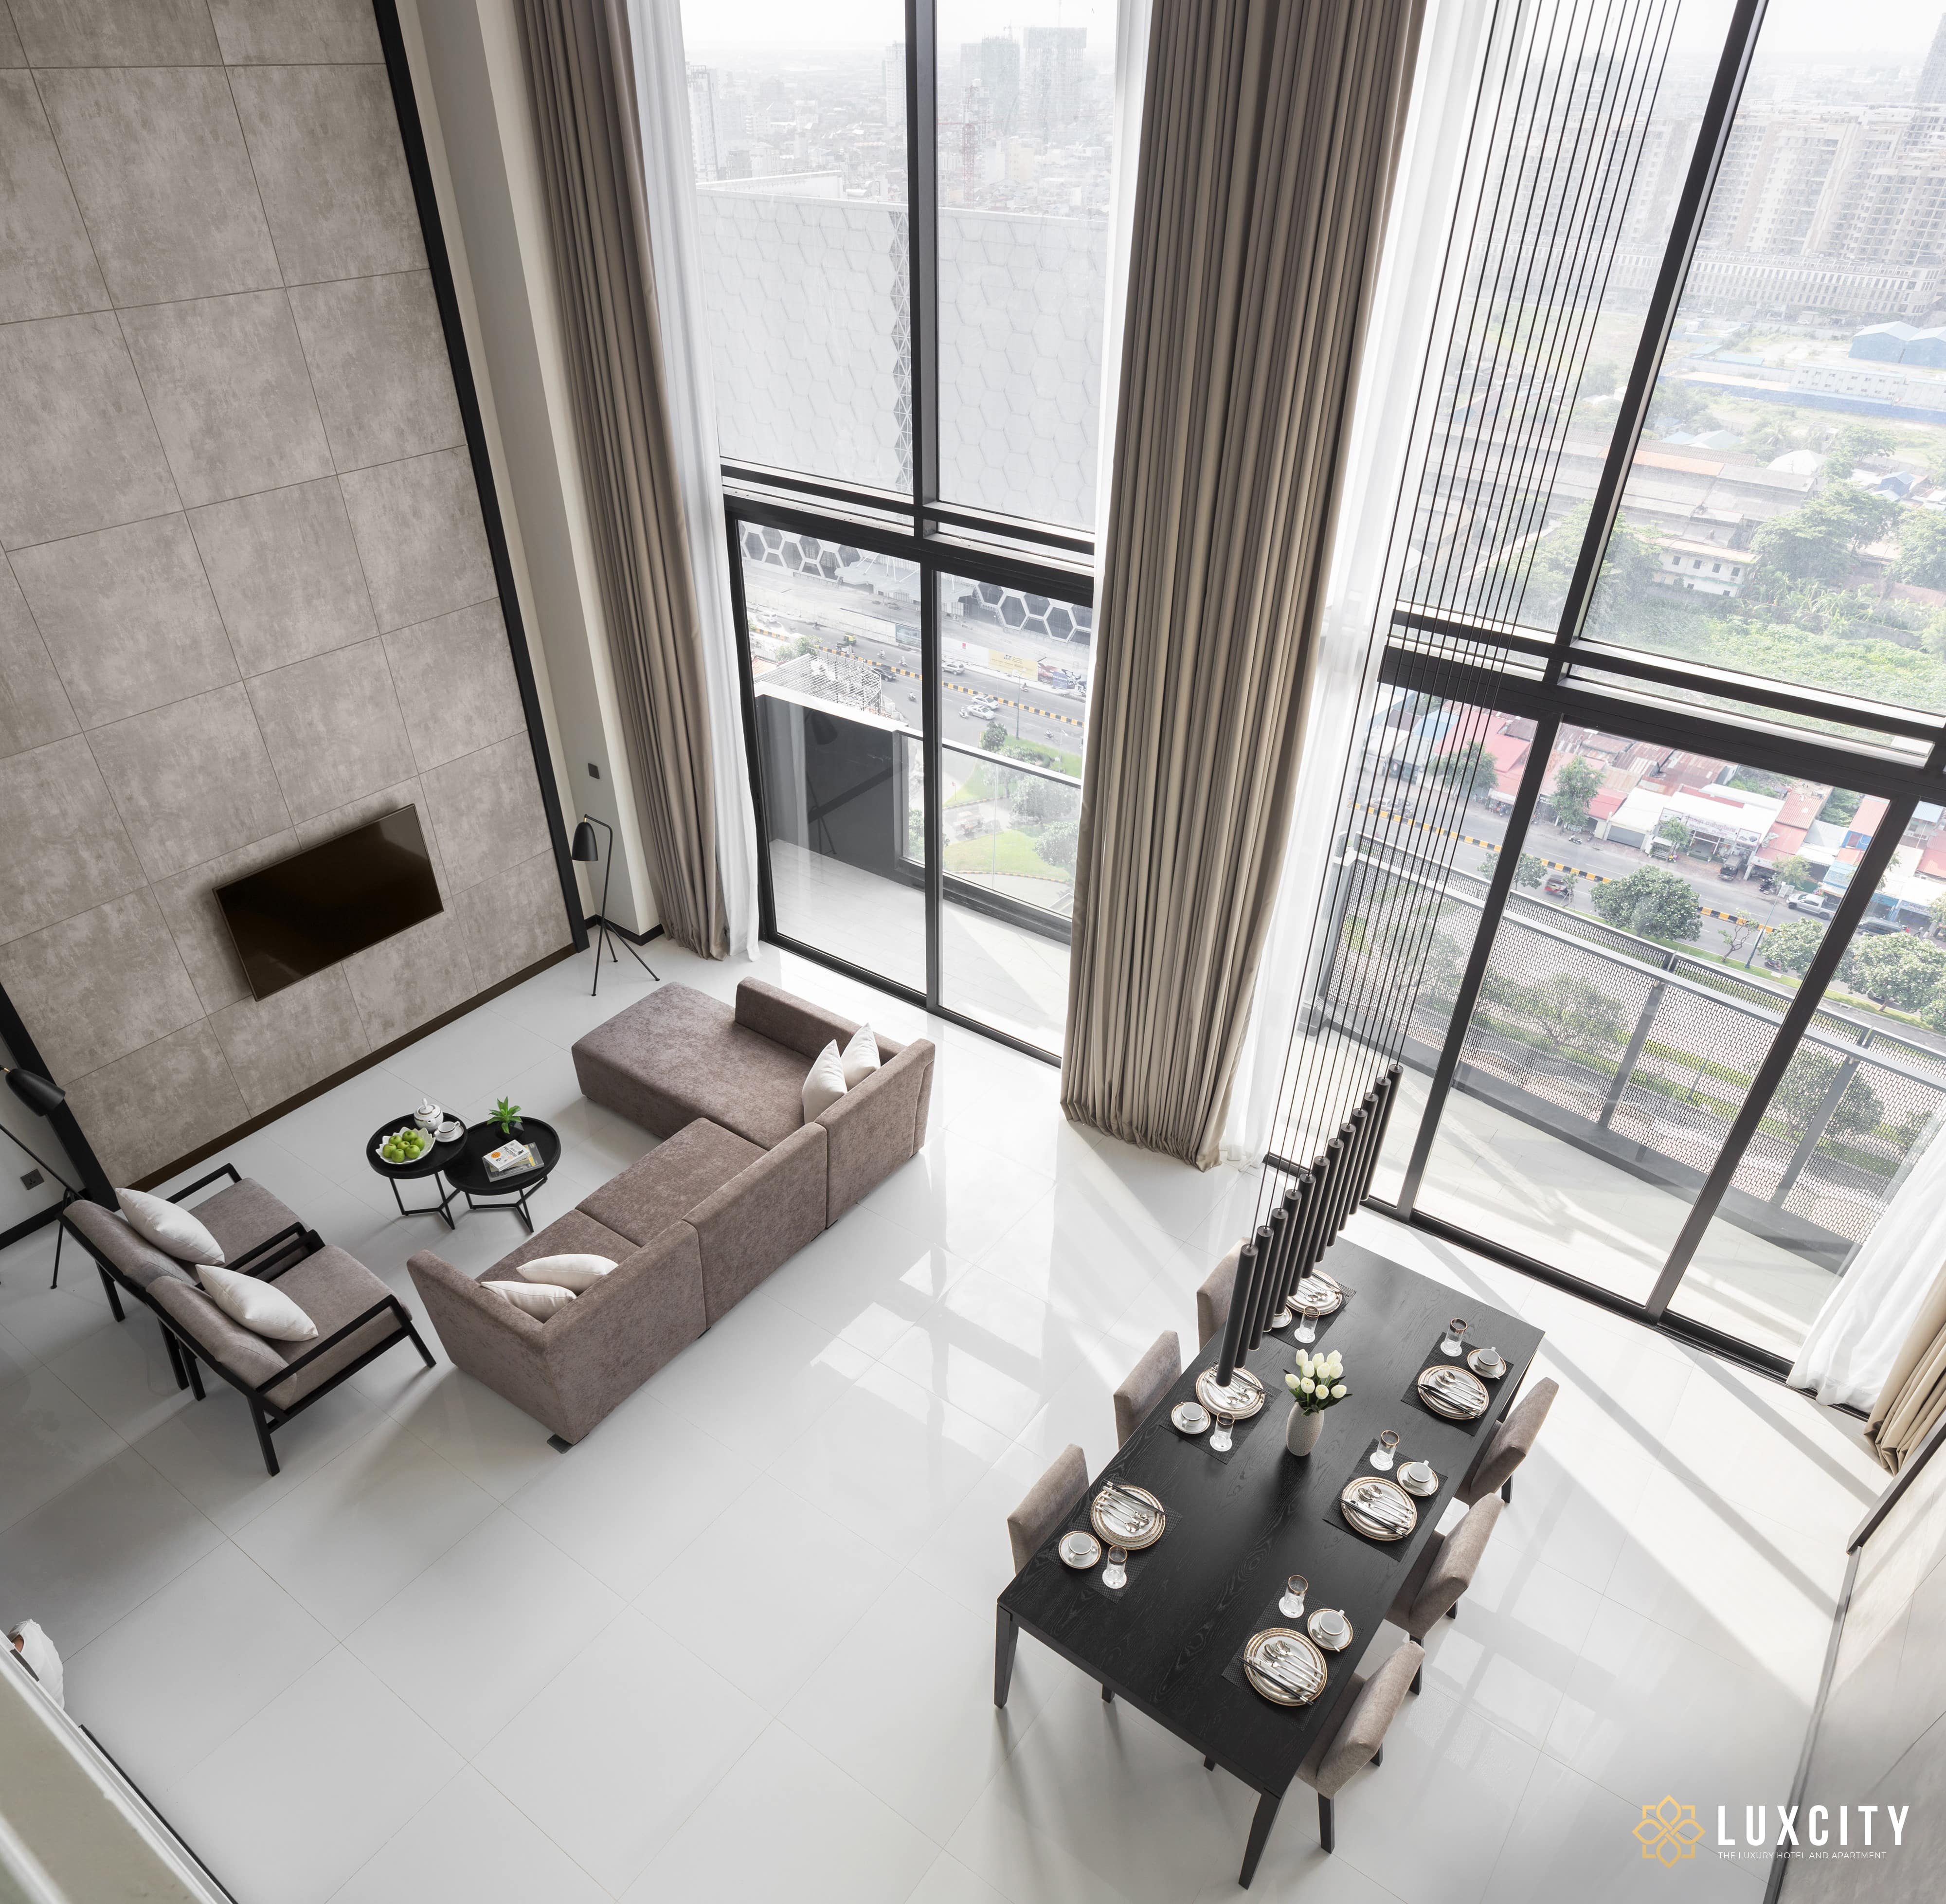 Sky Villa is the wisest choice for customers when vacationing in Phnom Penh